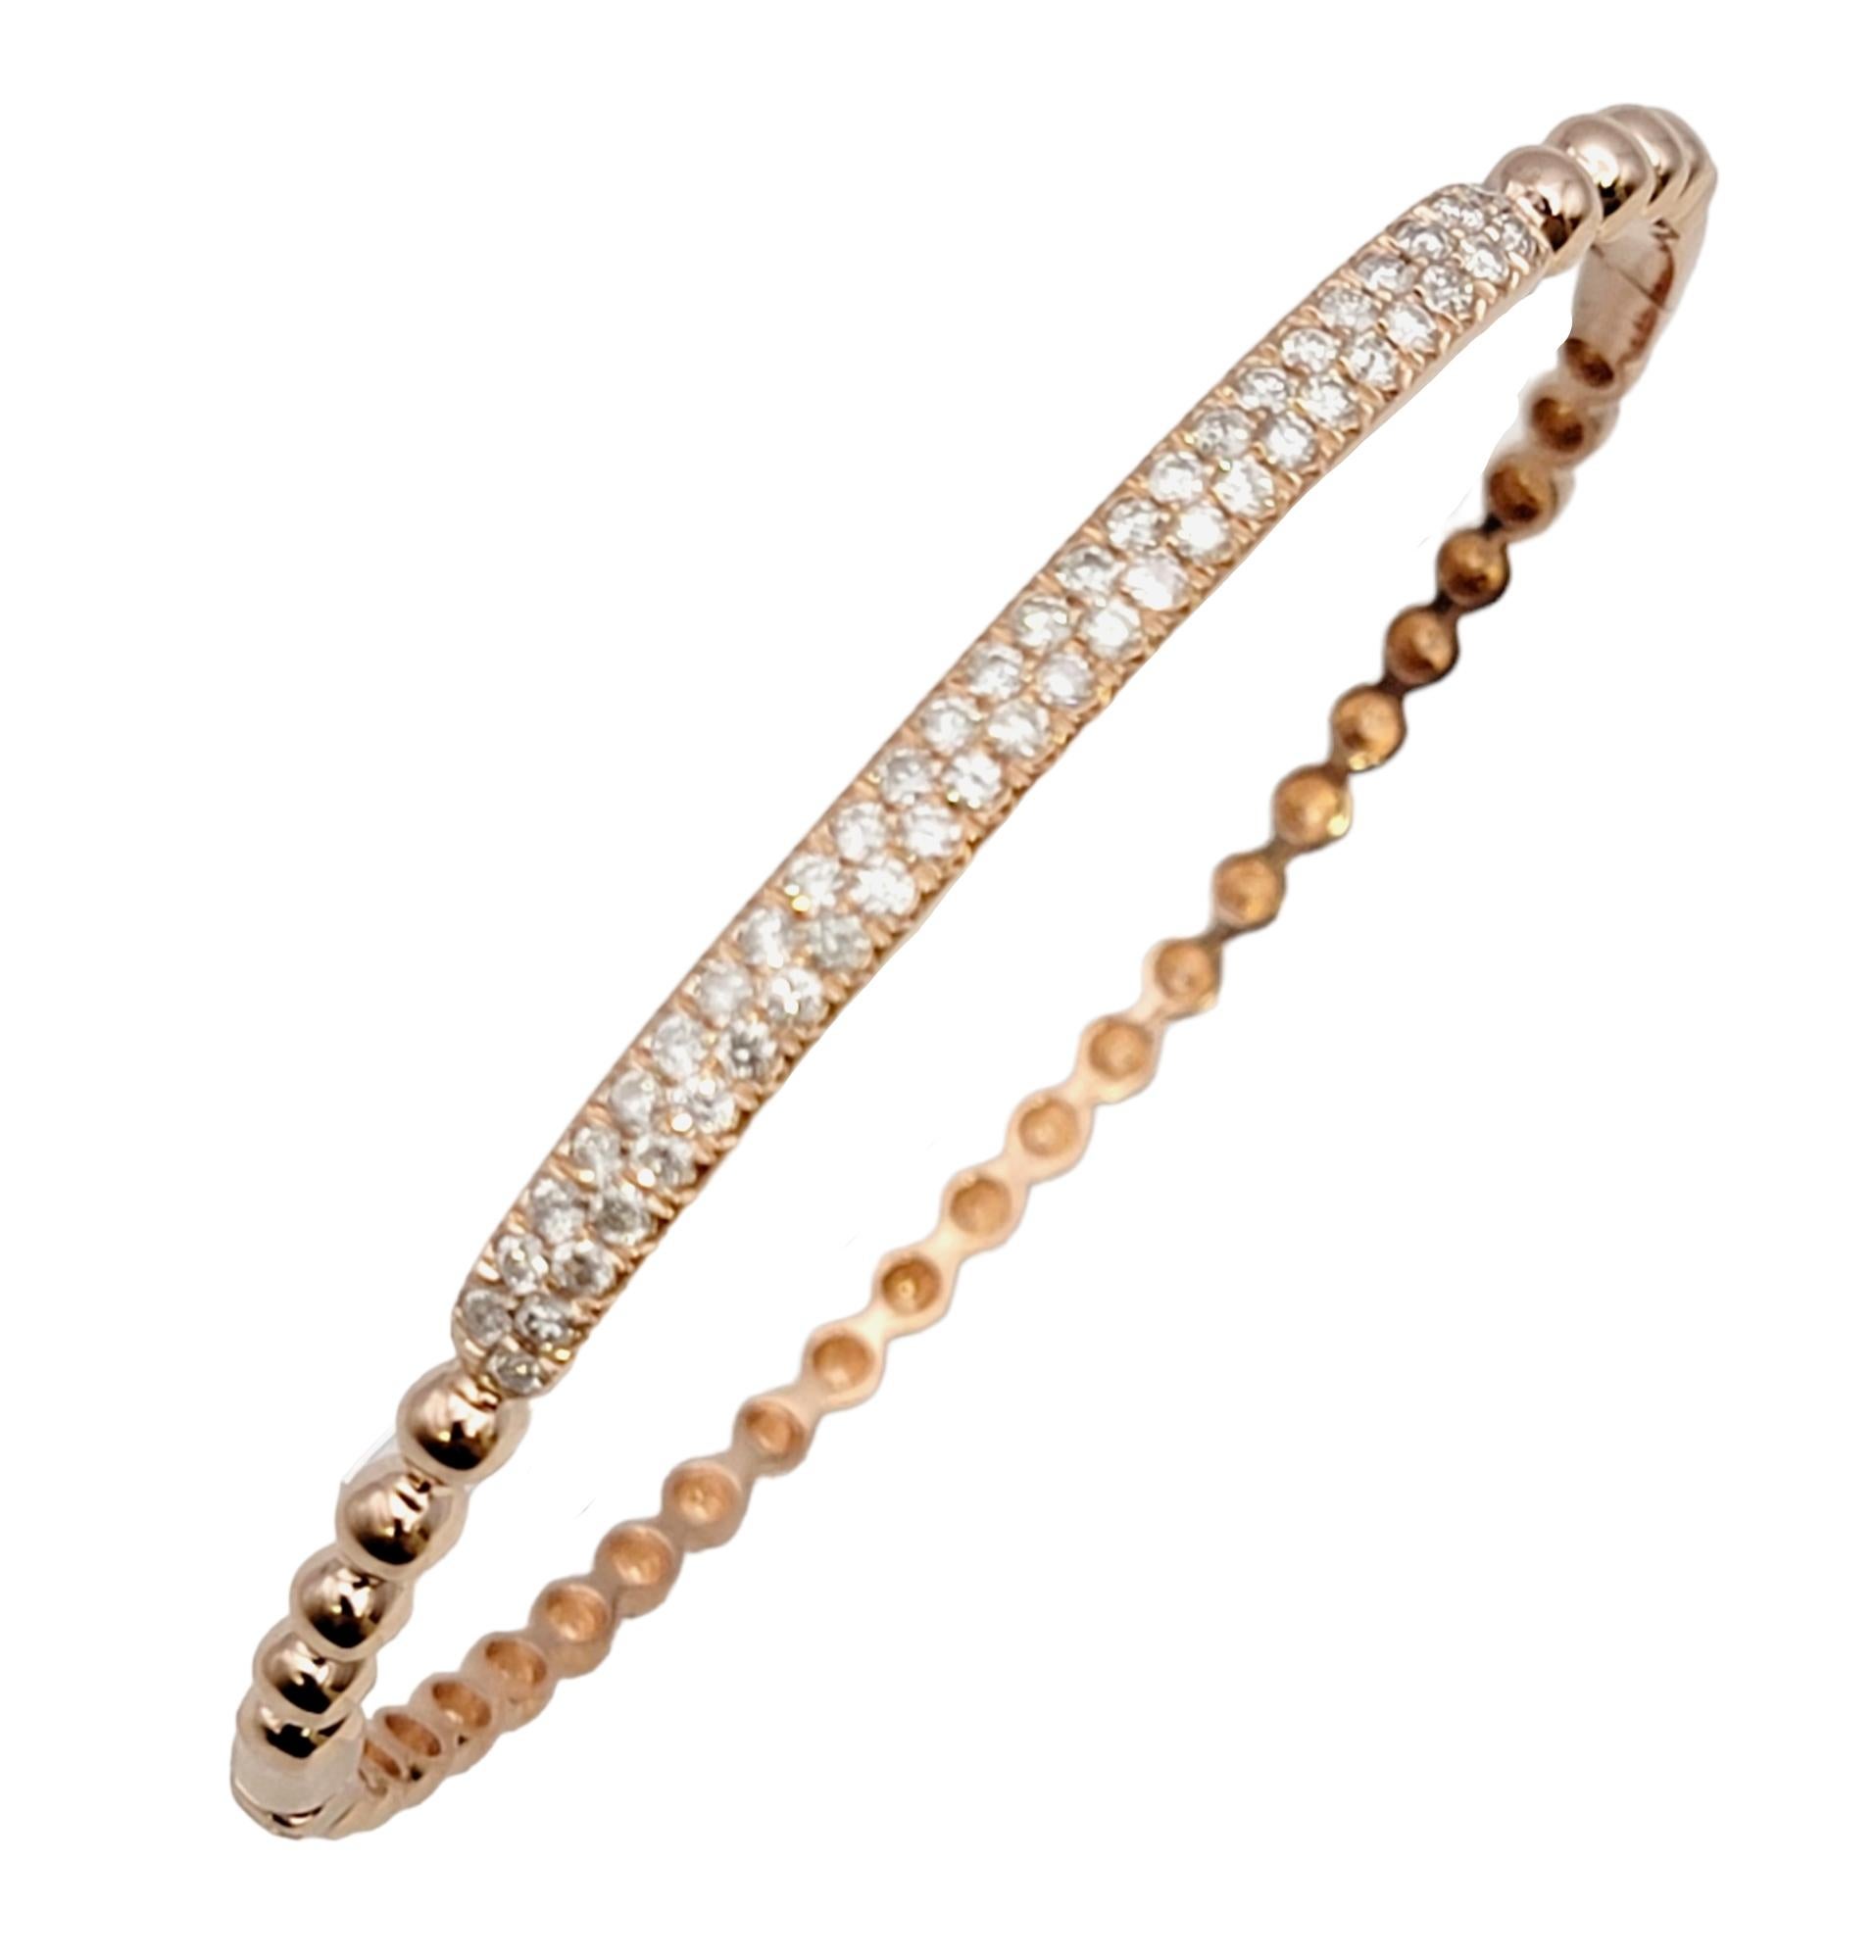 Contemporary bangle bracelet in a 14K rose gold featuring a narrow bubble design. The top portion of the sleek bracelet is adorned with two elegant row of sparkling pave diamonds. Stack it with other bracelets for a modern look, or simply wear on